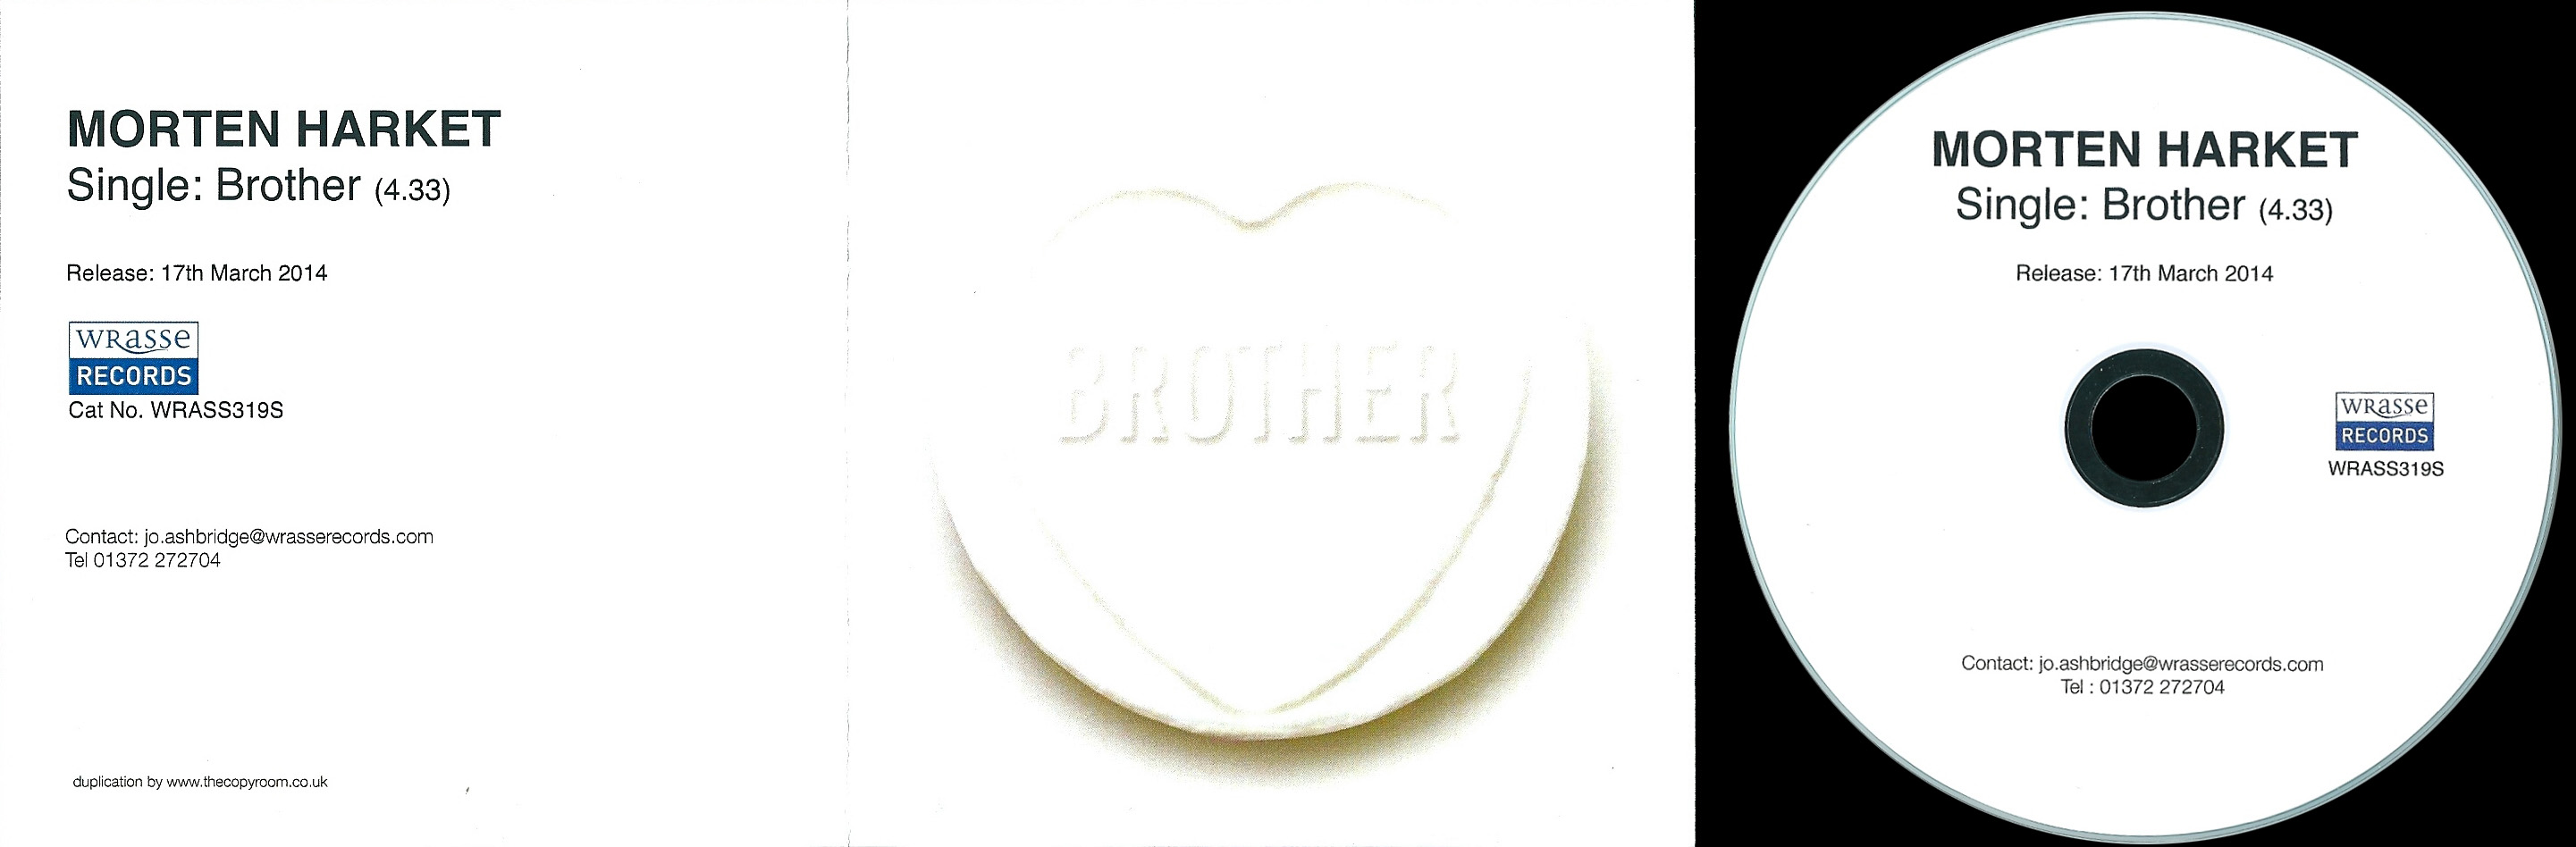 Brother UK 1 track promo - click to enlarge